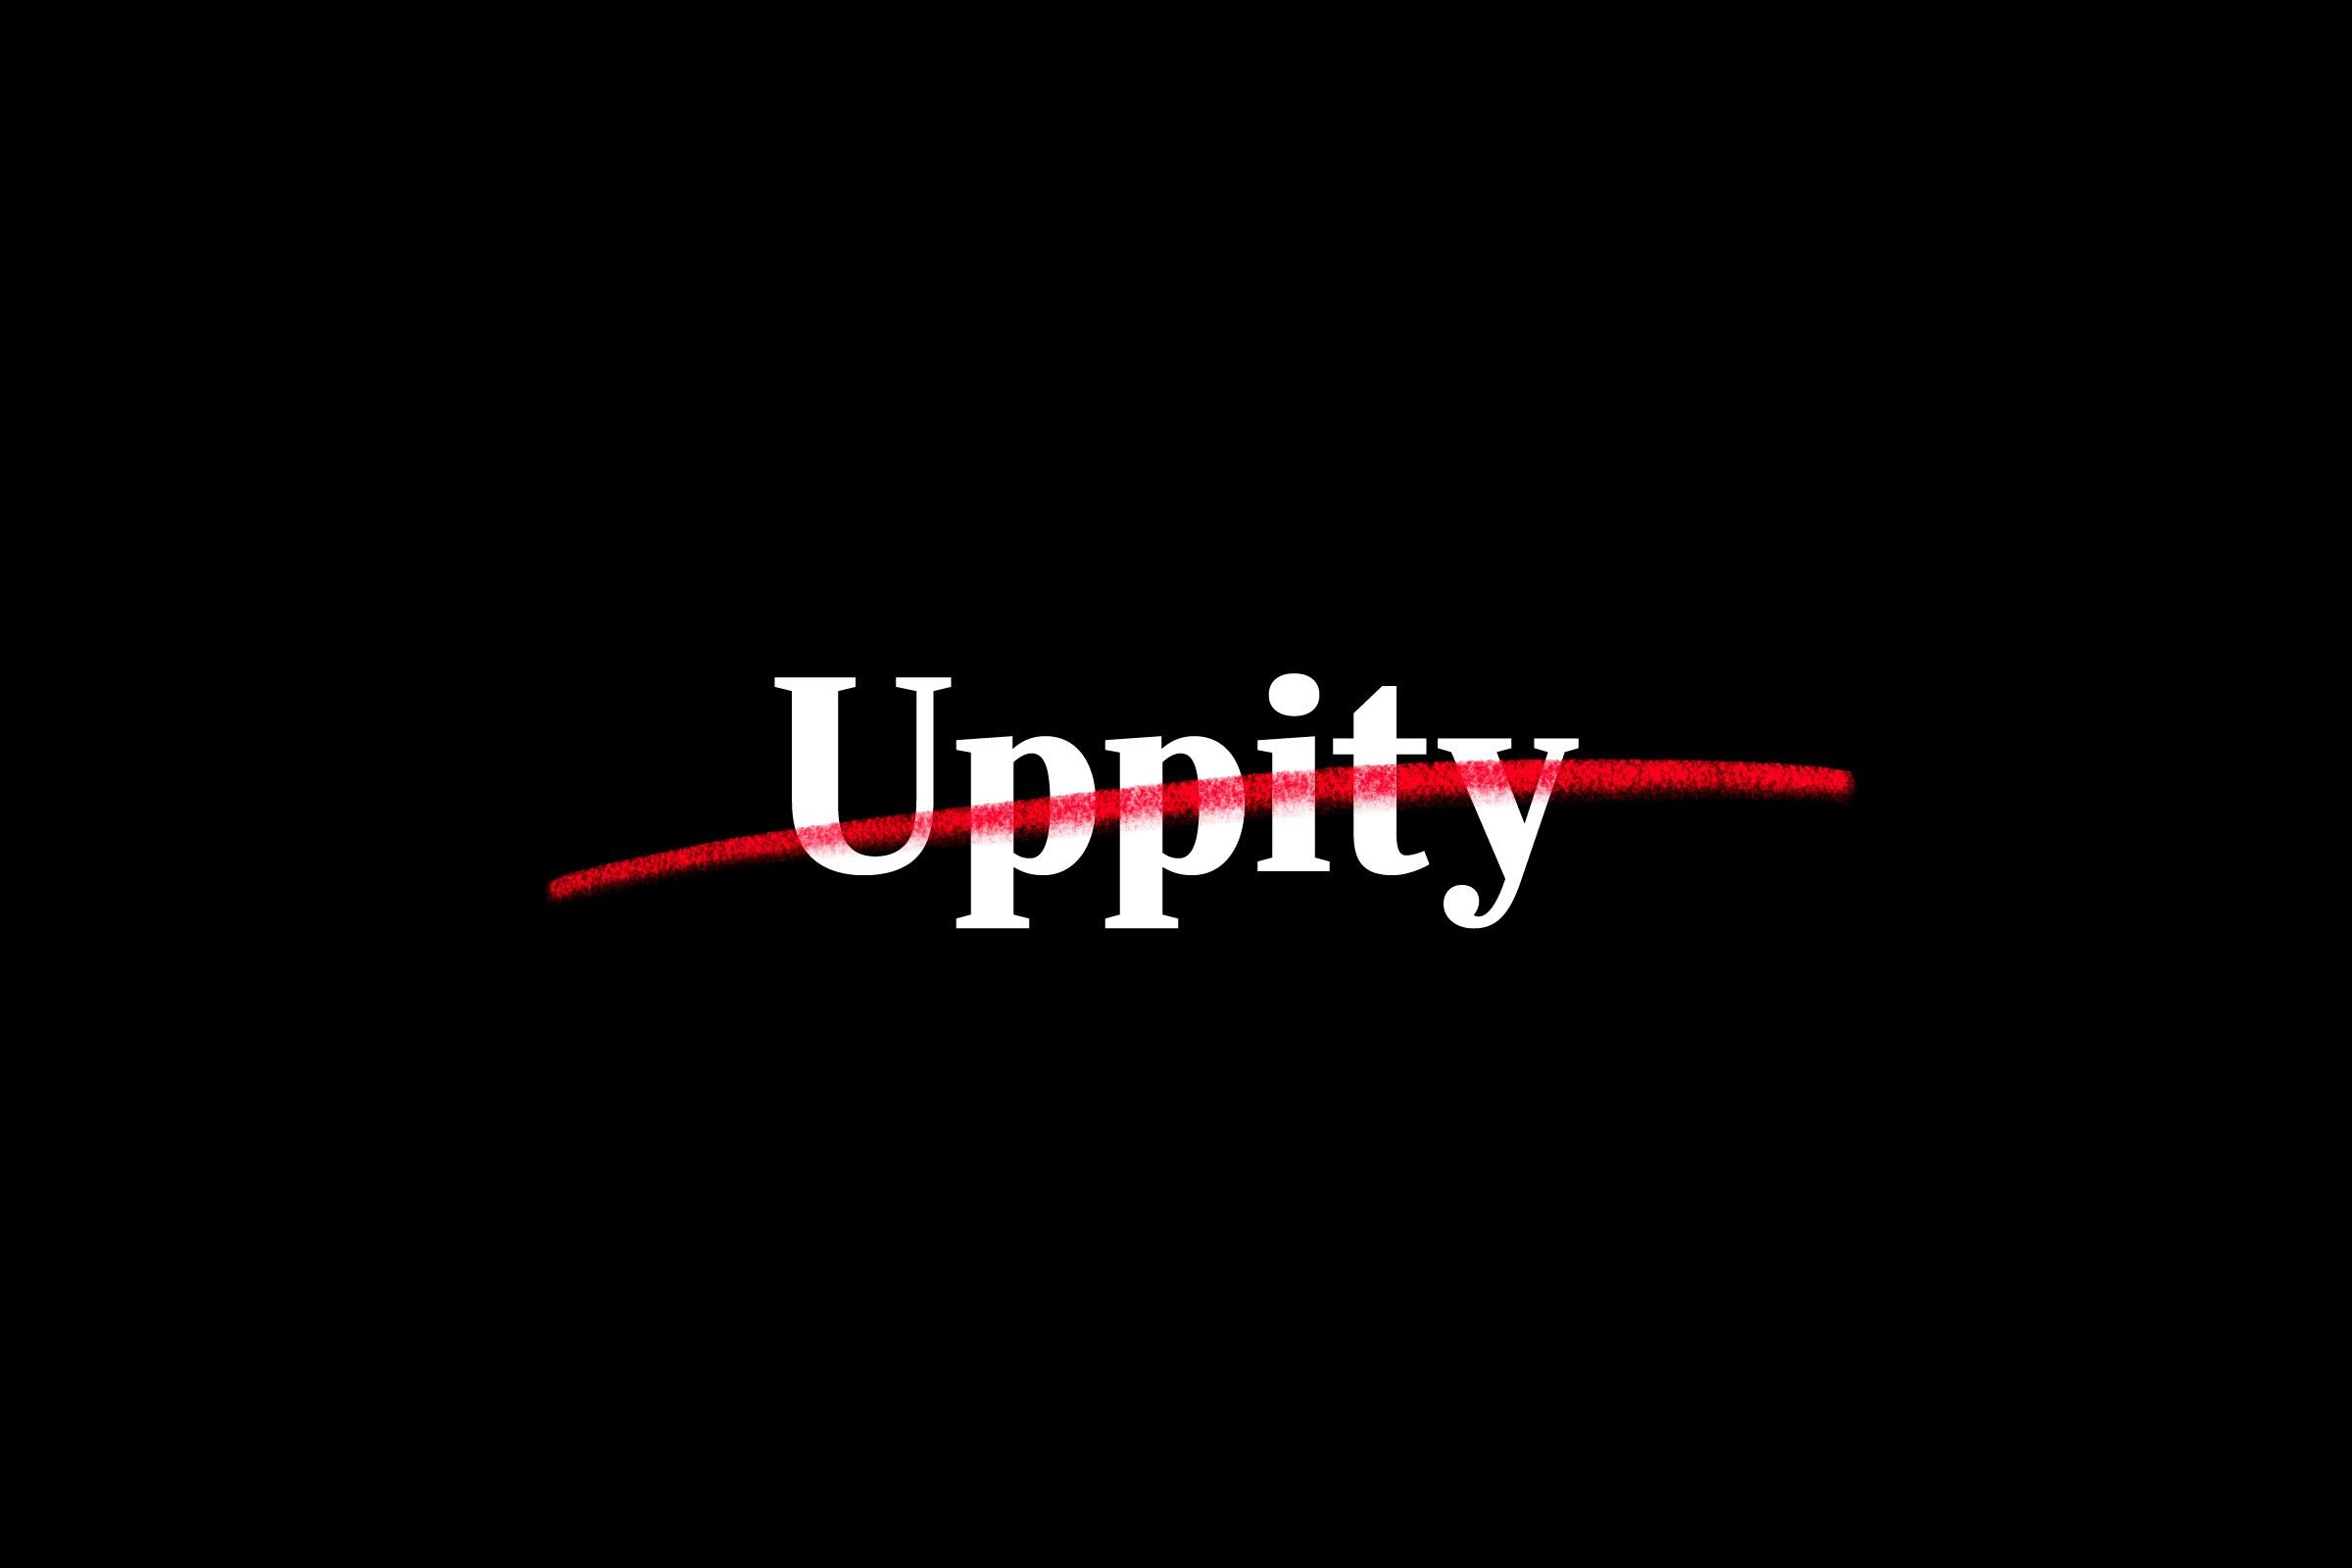 "uppity" crossed out